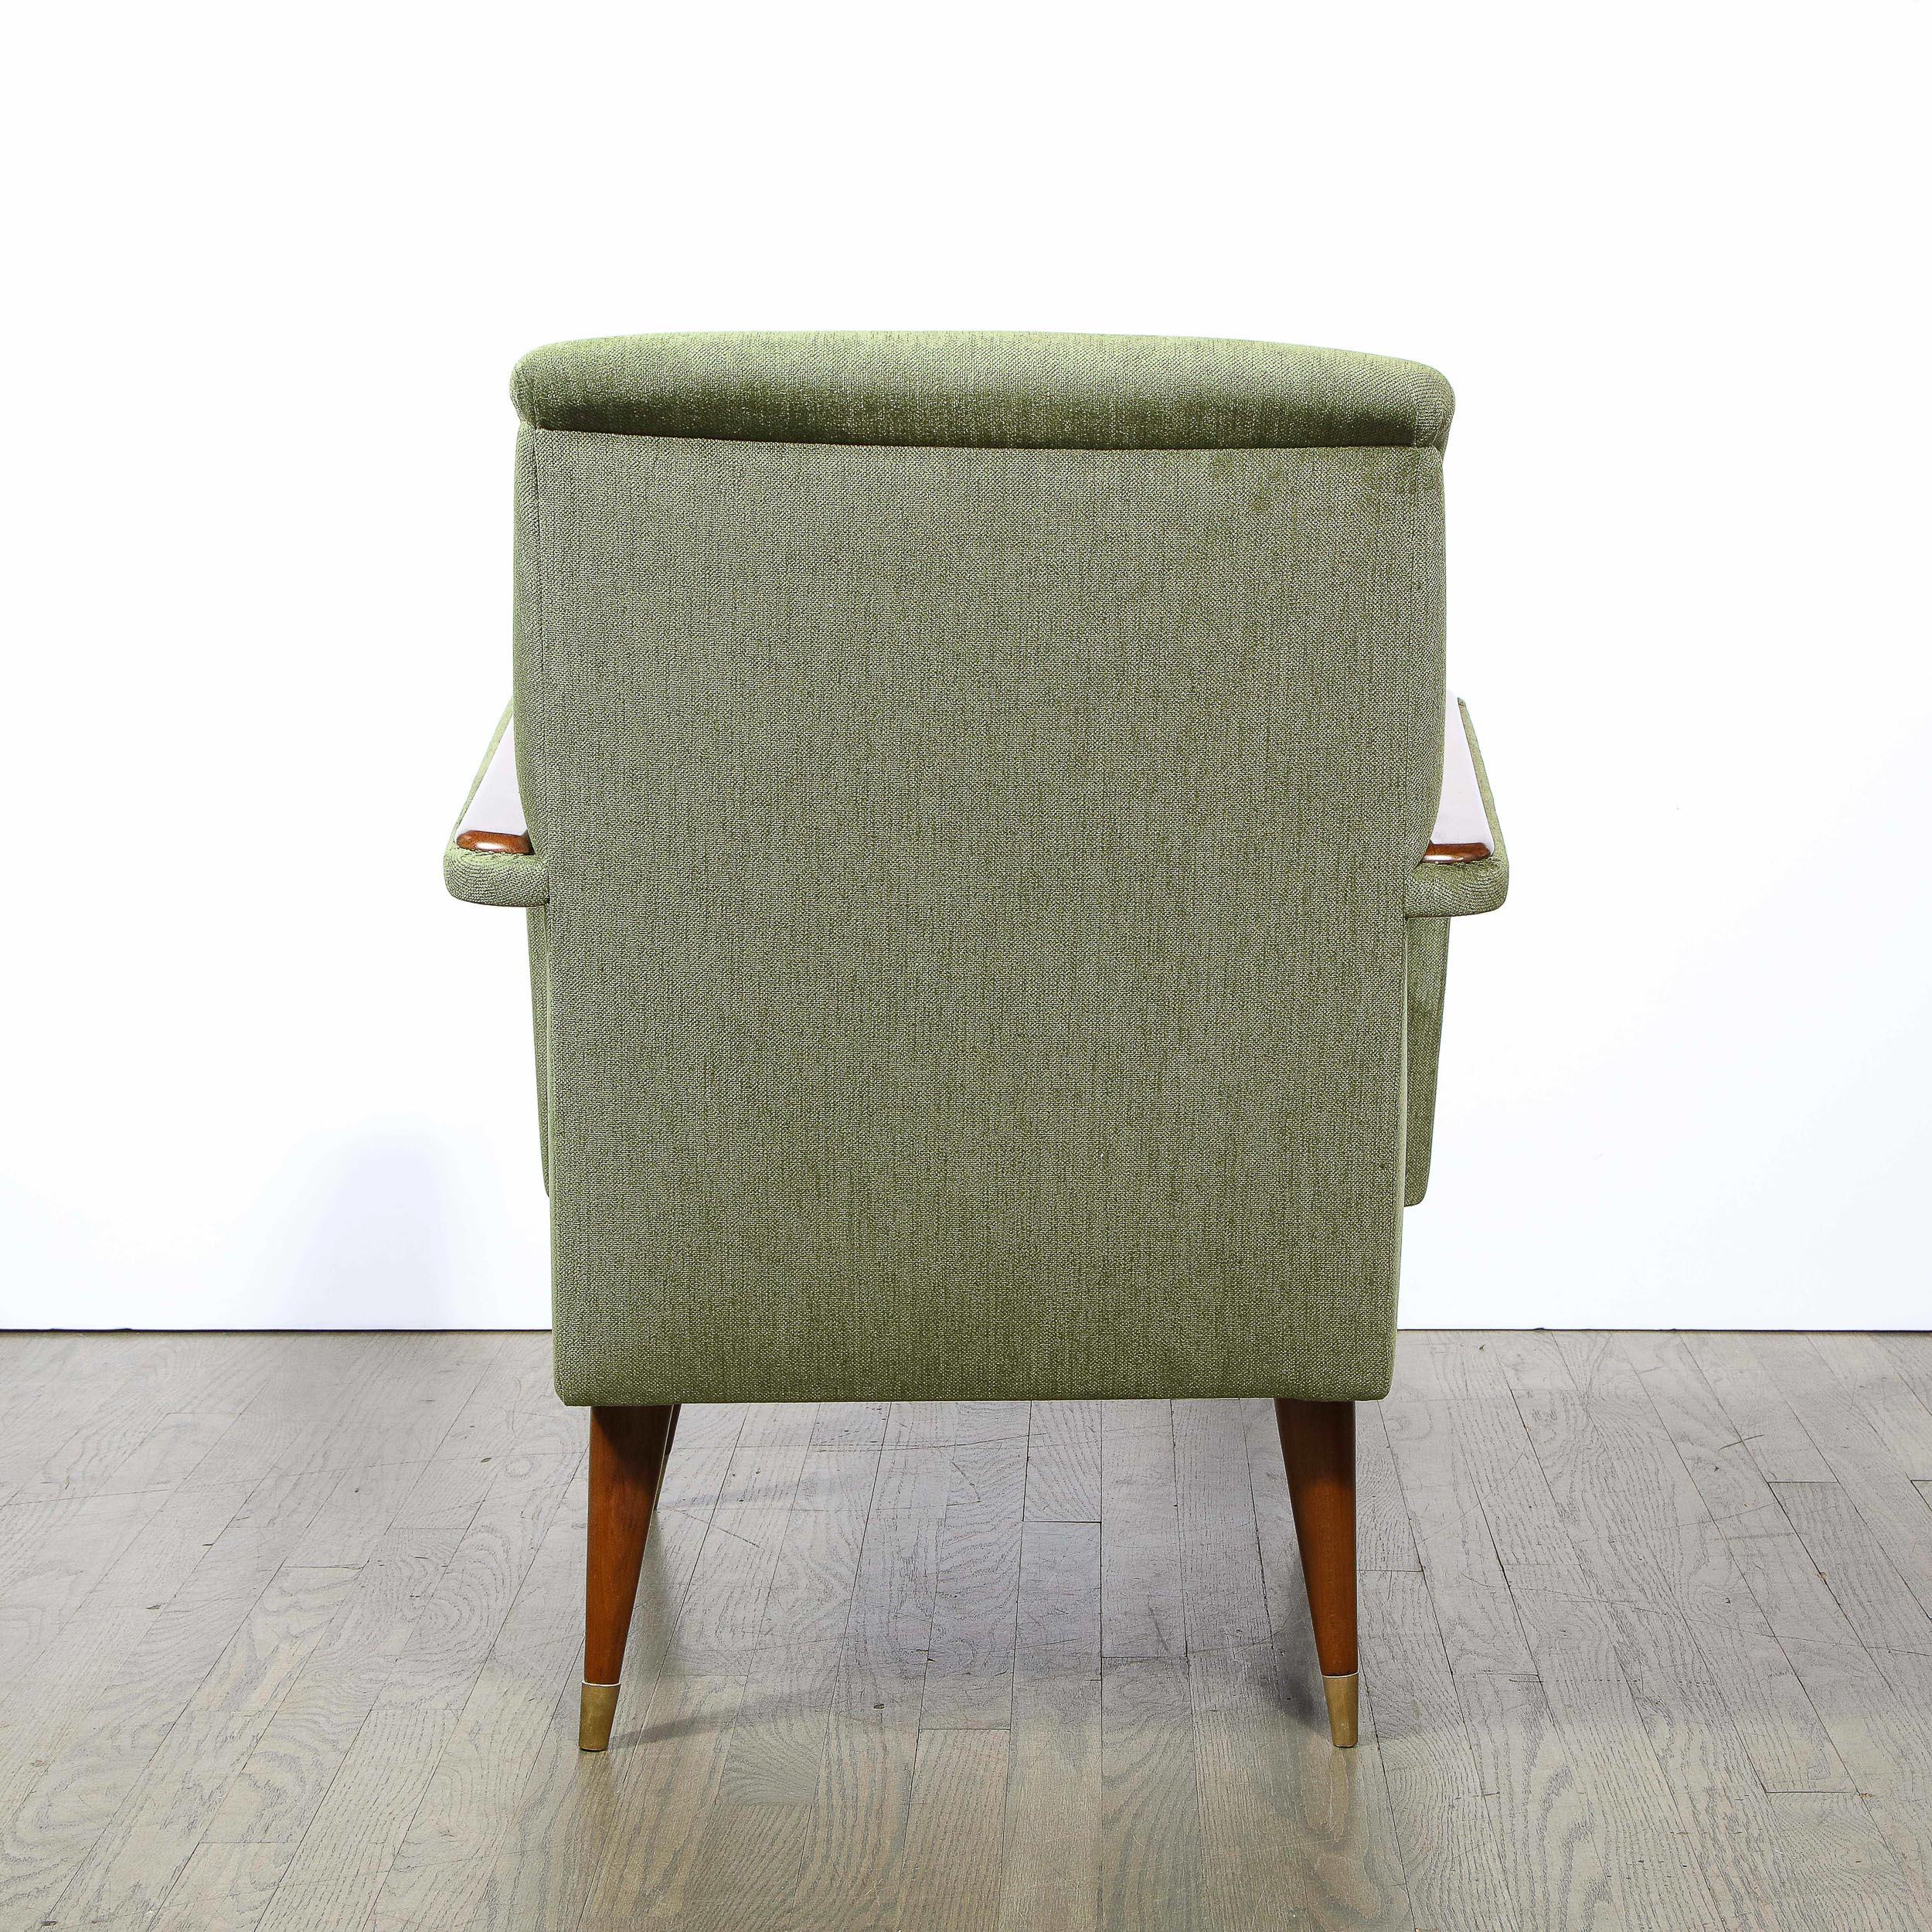 Mid-20th Century Pair of Mid-Century Modern Walnut & Moss Green Upholstery Arm Cutout Chairs